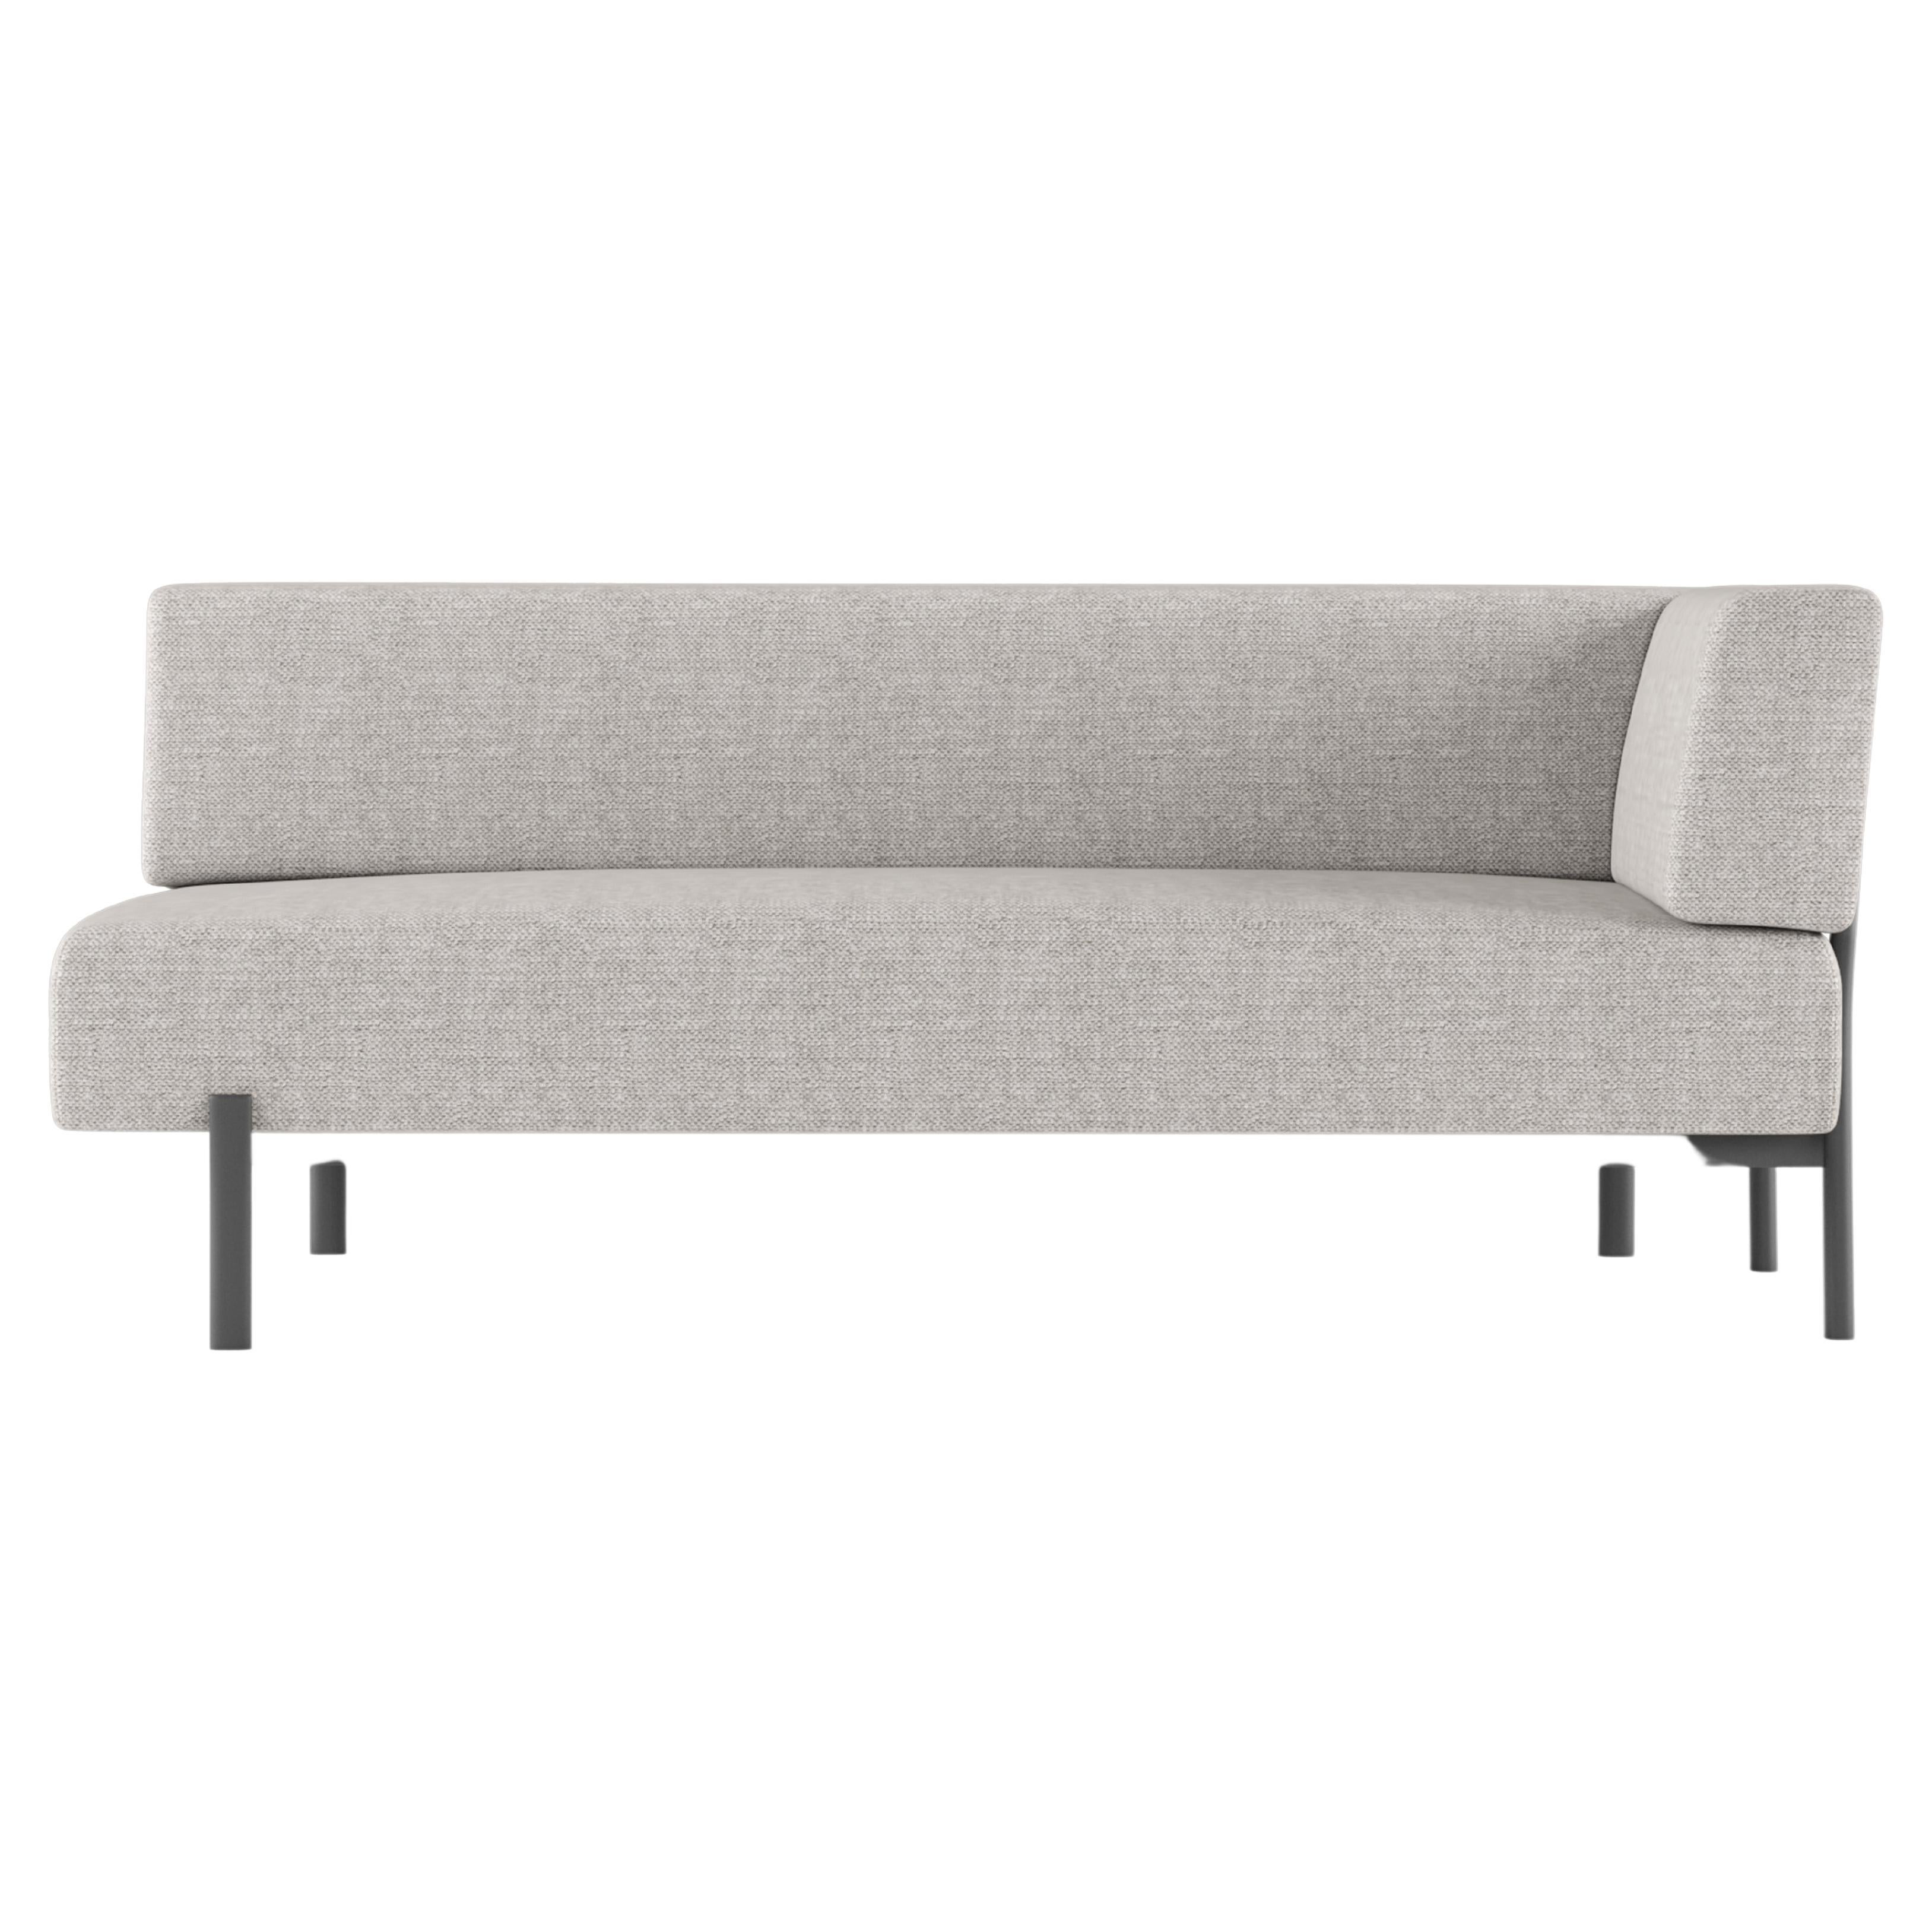 Alias T05_O DX Ten Angular Outdoor Sofa in Grey w Black Lacquered Aluminum Frame For Sale